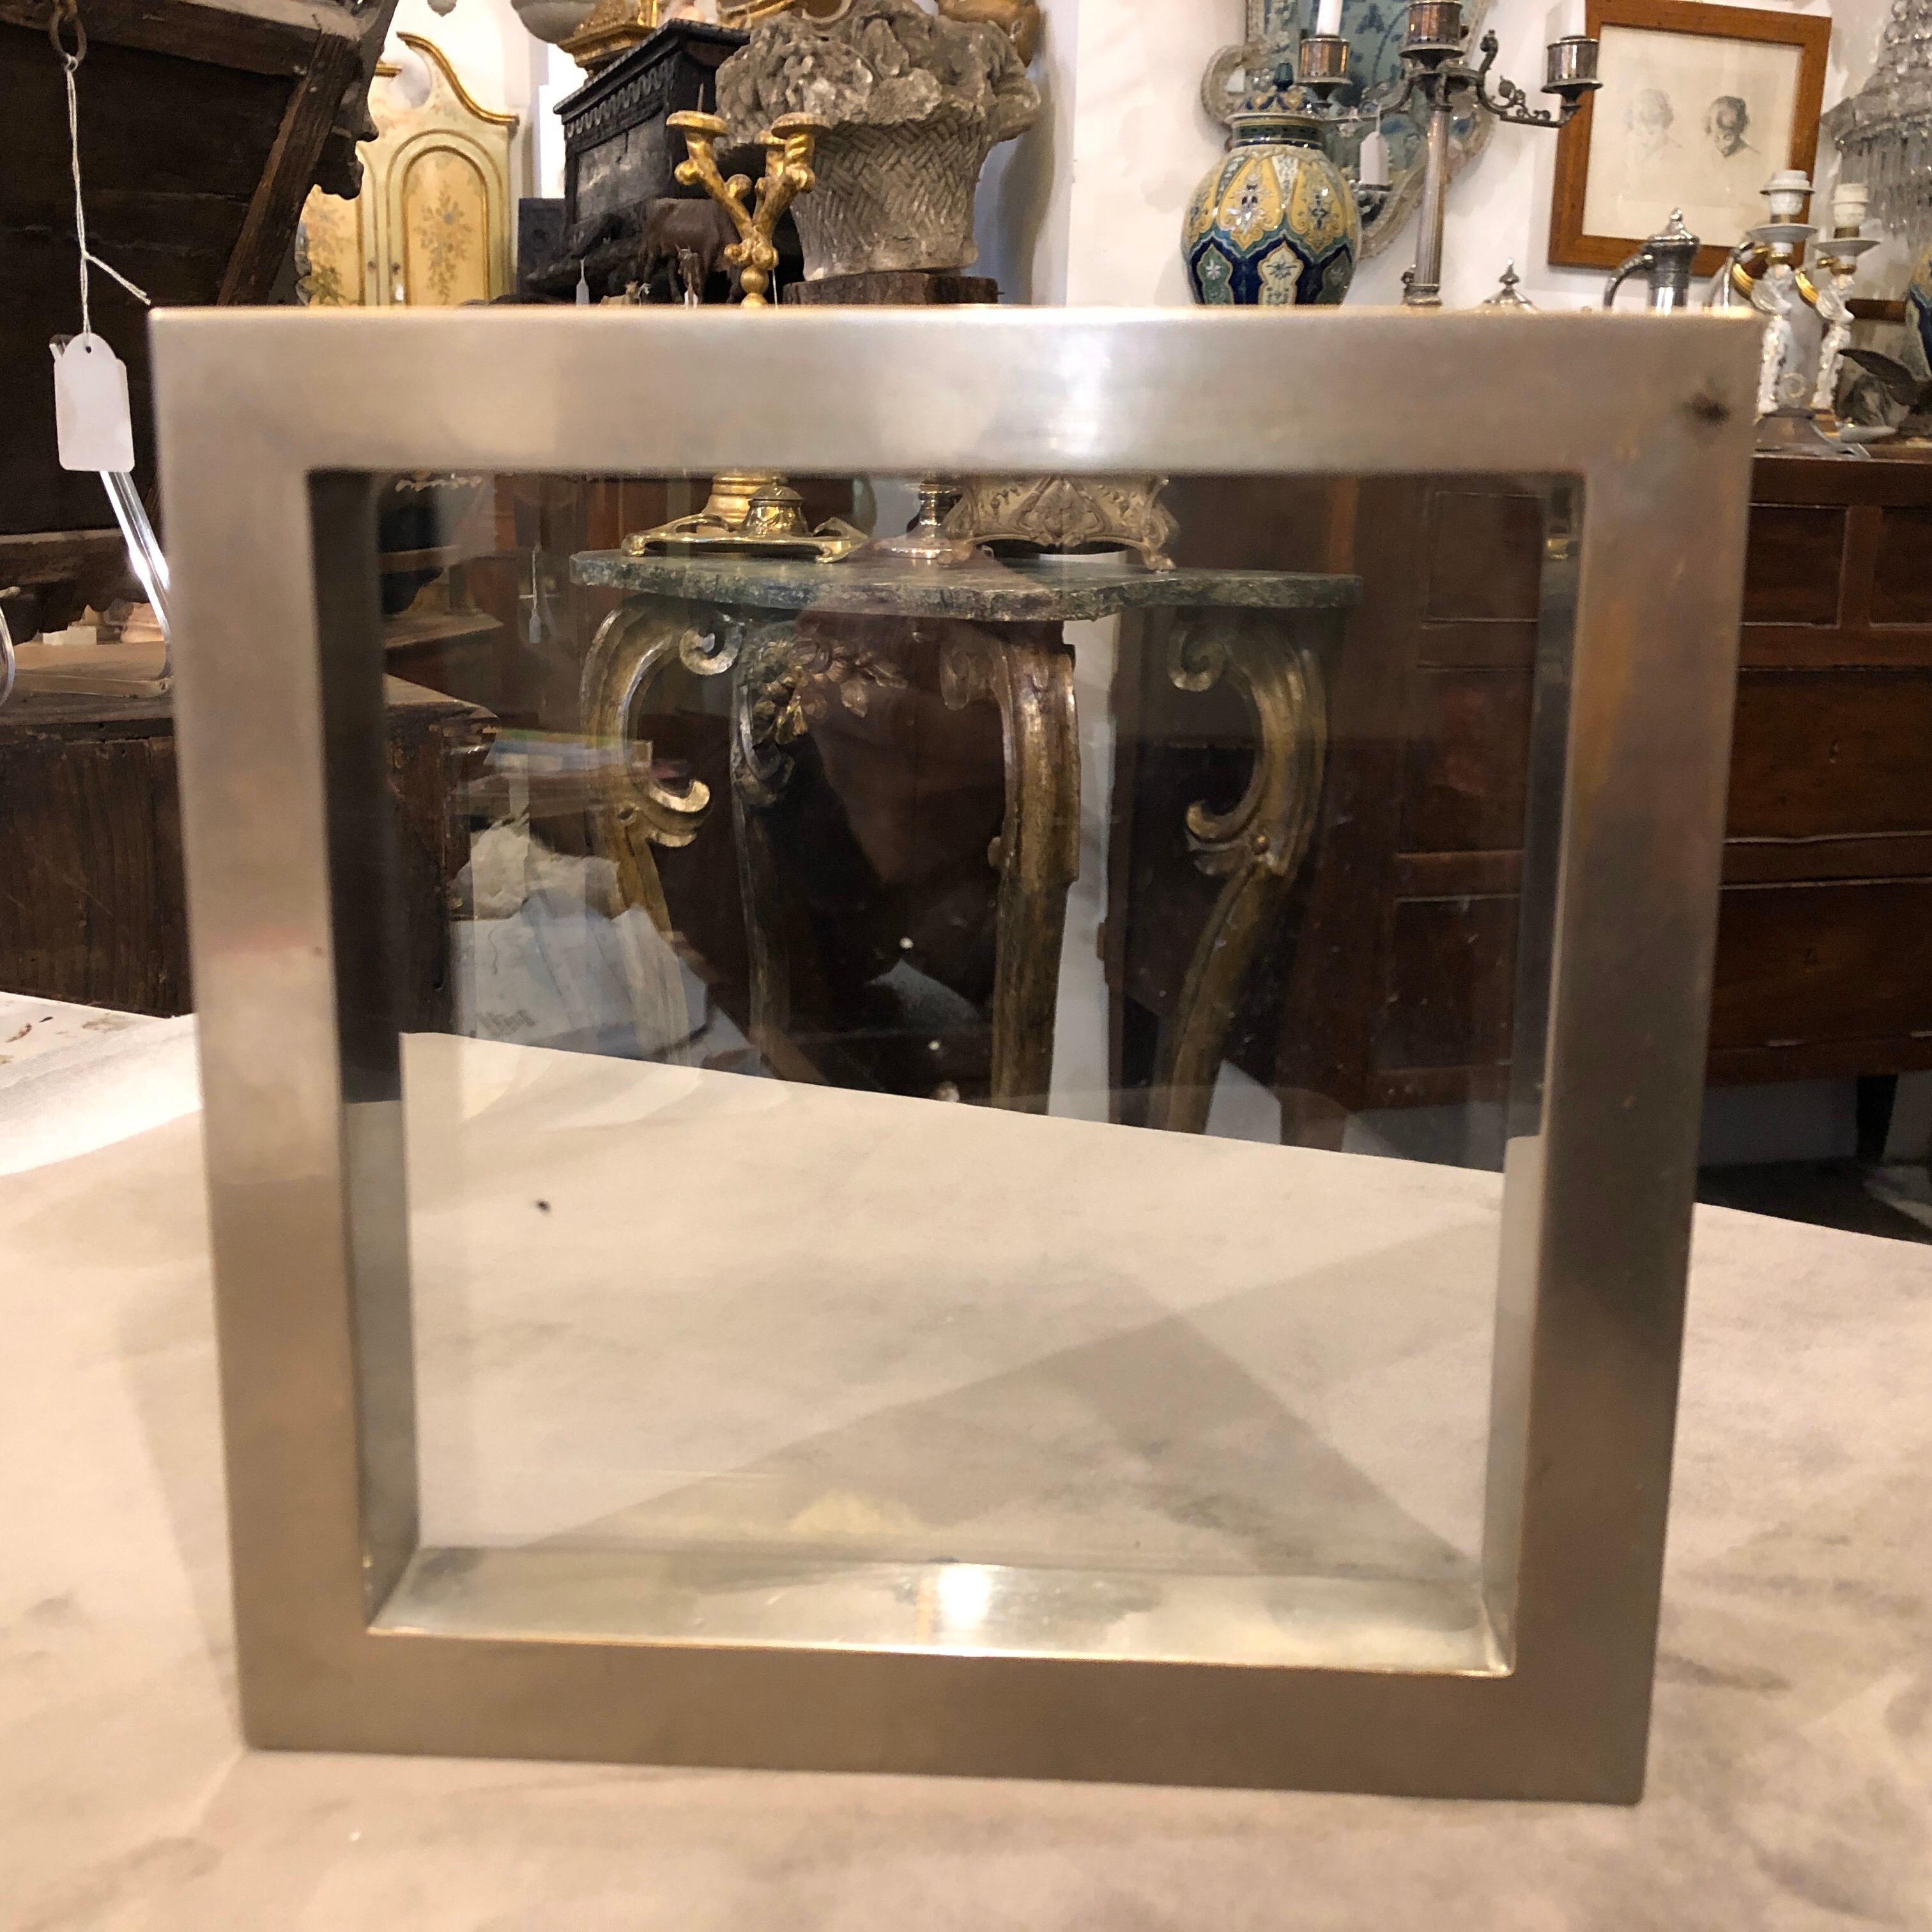 A rare metal ashtray, also usable as a picture frame, signed by Gabriella Crespi, an illustrious Italian designer. The ashtray consists of a metal square and two glass plates. The two plates are screwed into the metal, and it is signed by Gabriella